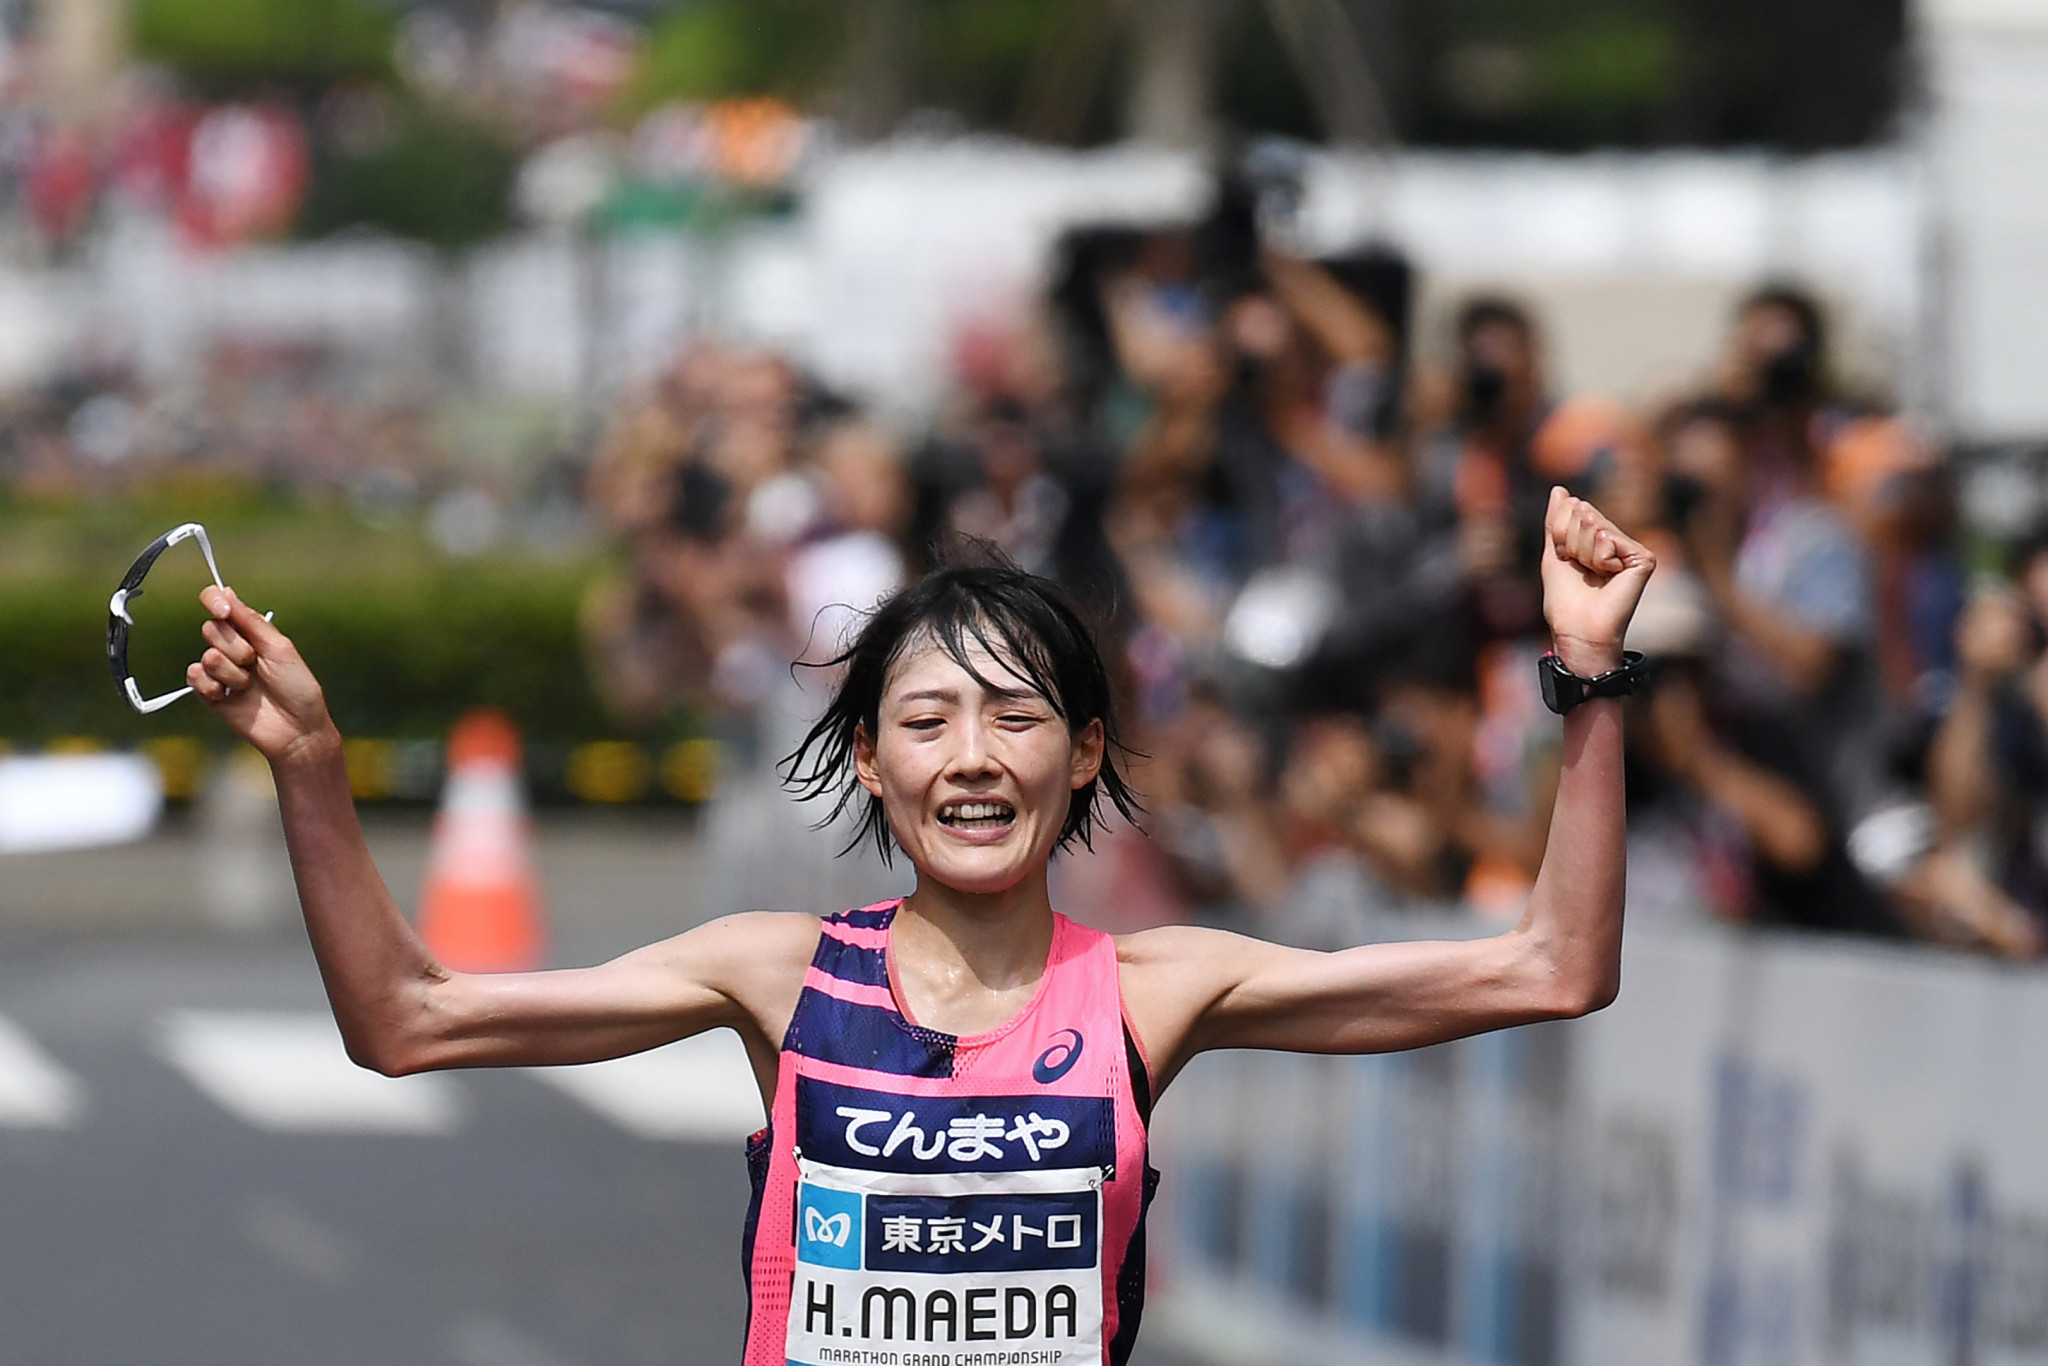 Honami Maeda won the women's race in the Japanese capital ©Getty Images